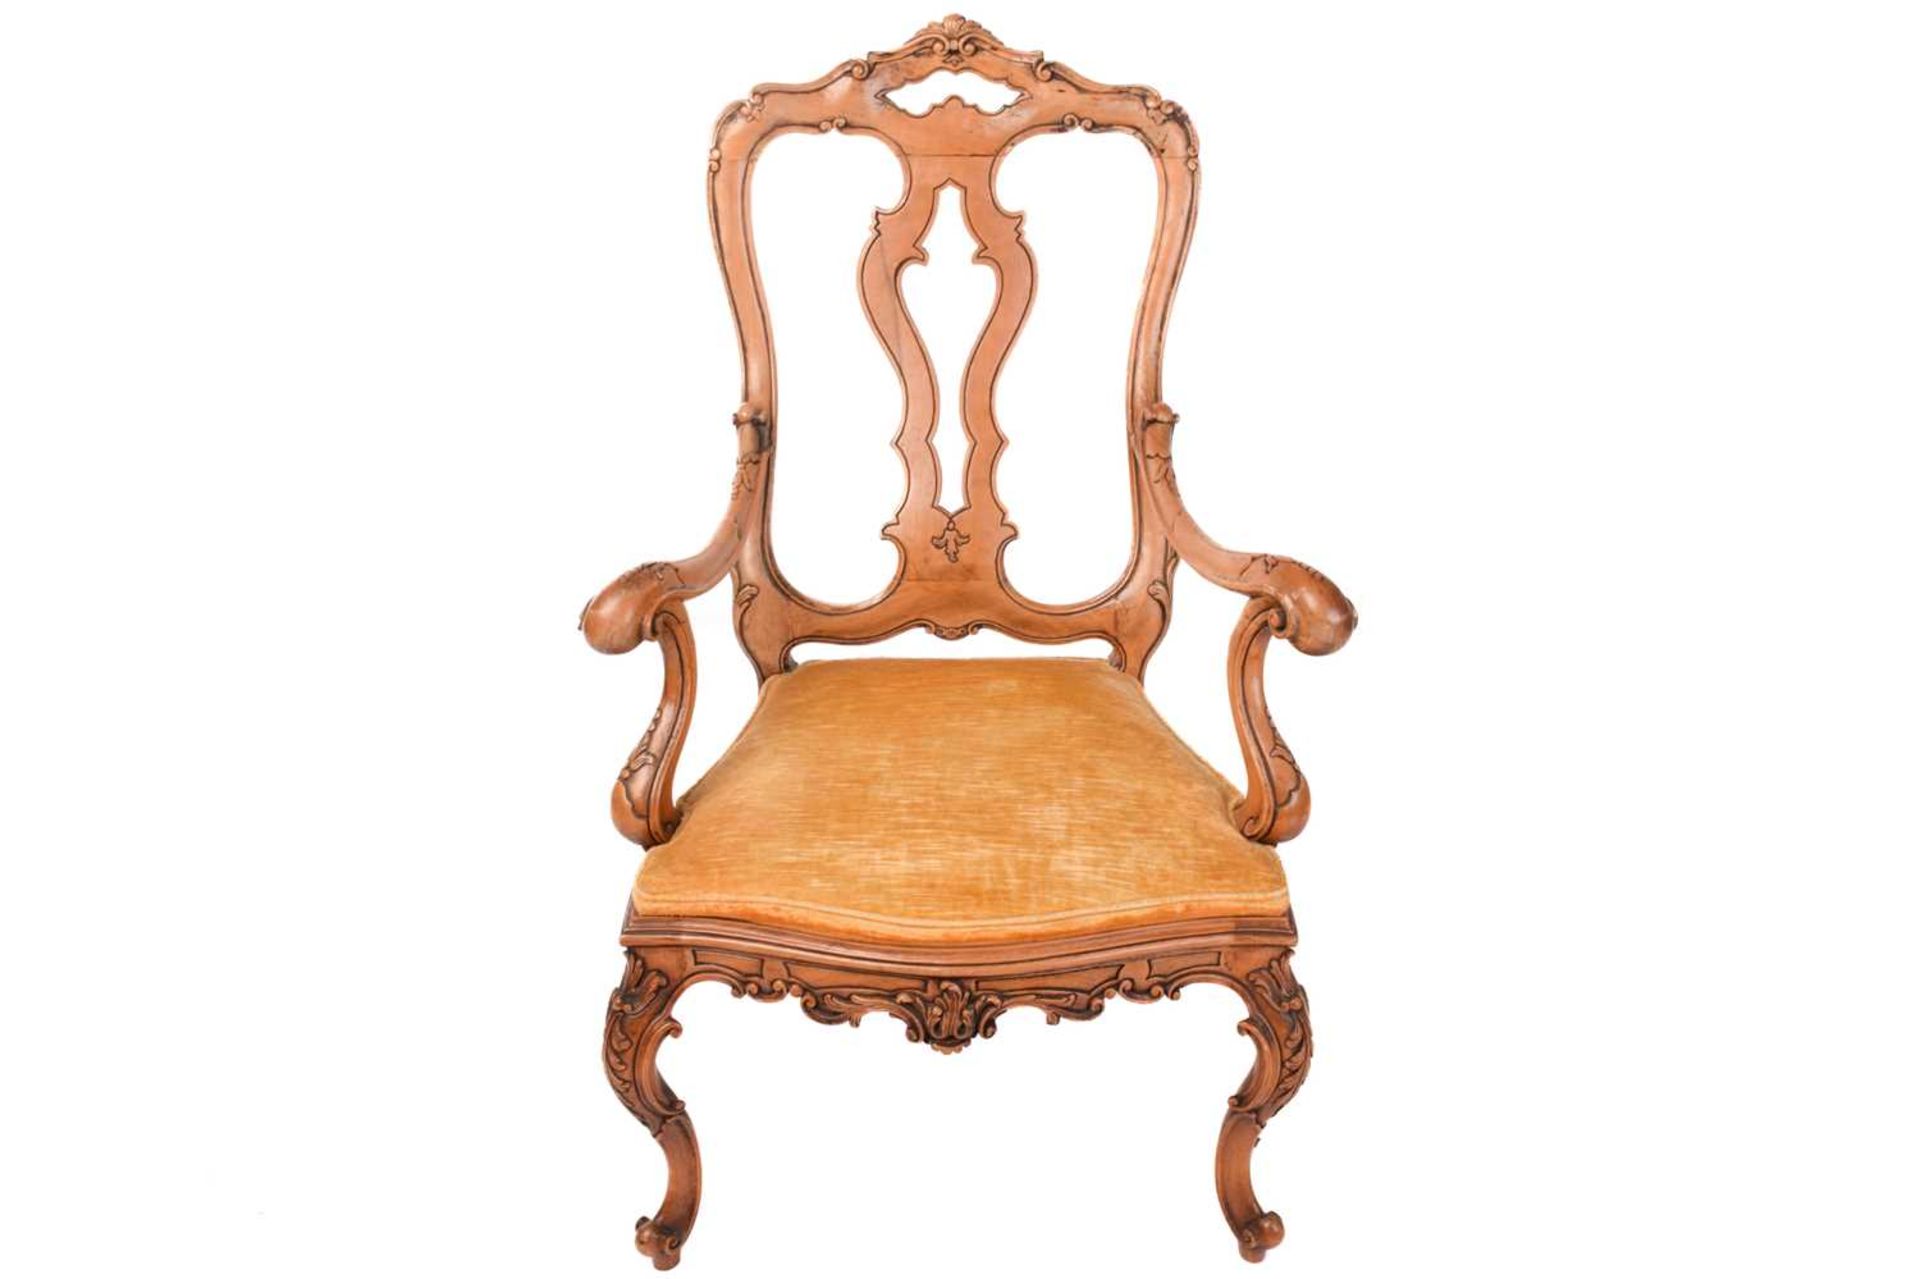 An 18th-century Venetian style carved walnut open armchair, 20th century with shaped spoon back - Image 5 of 5